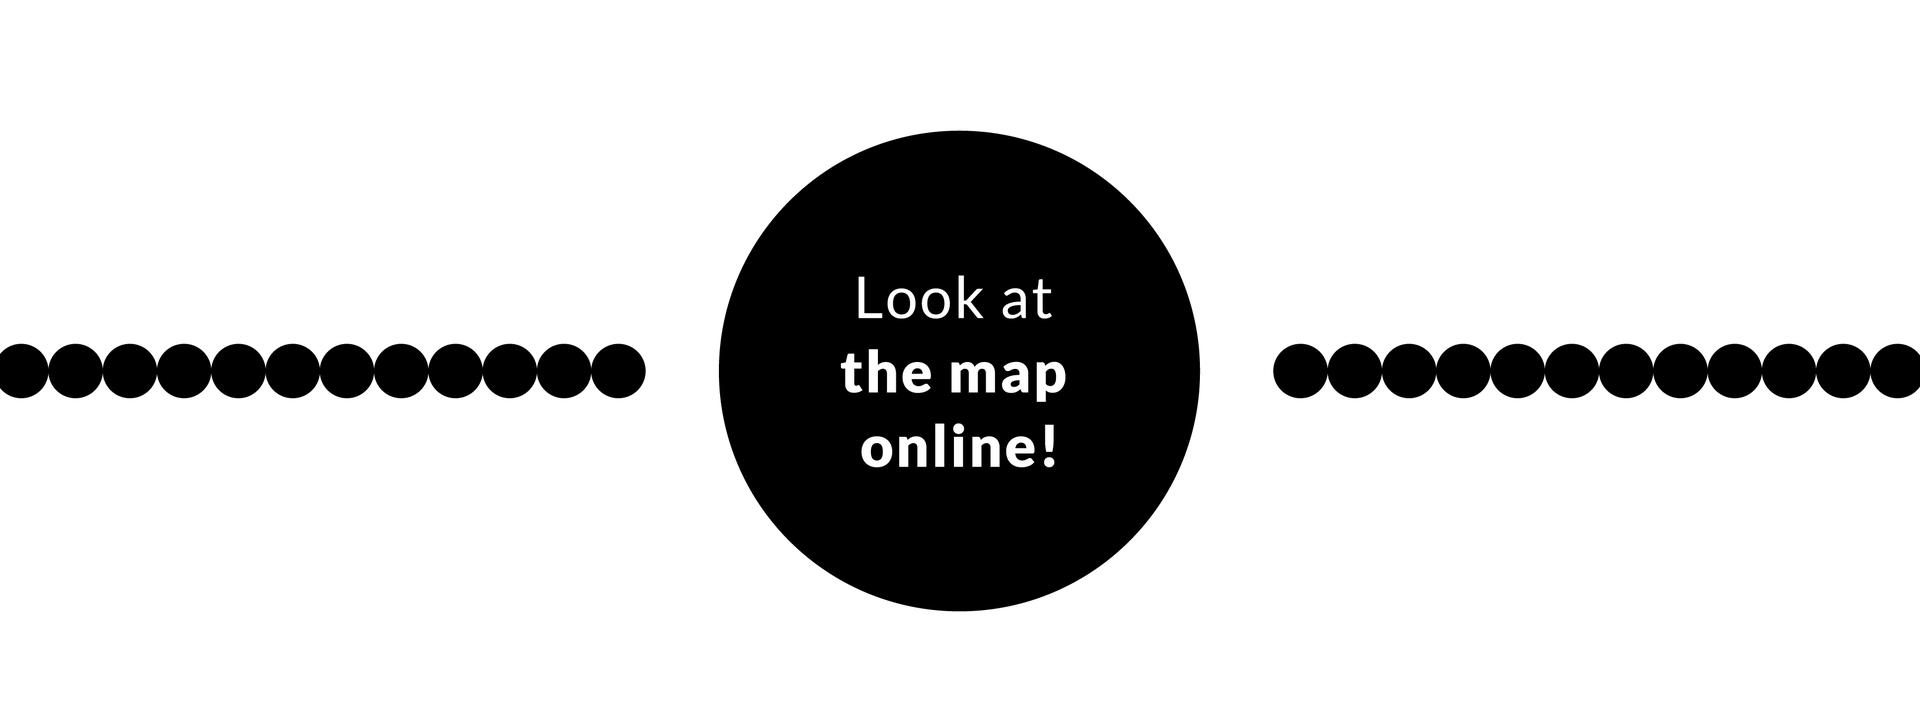 Look at the map online!